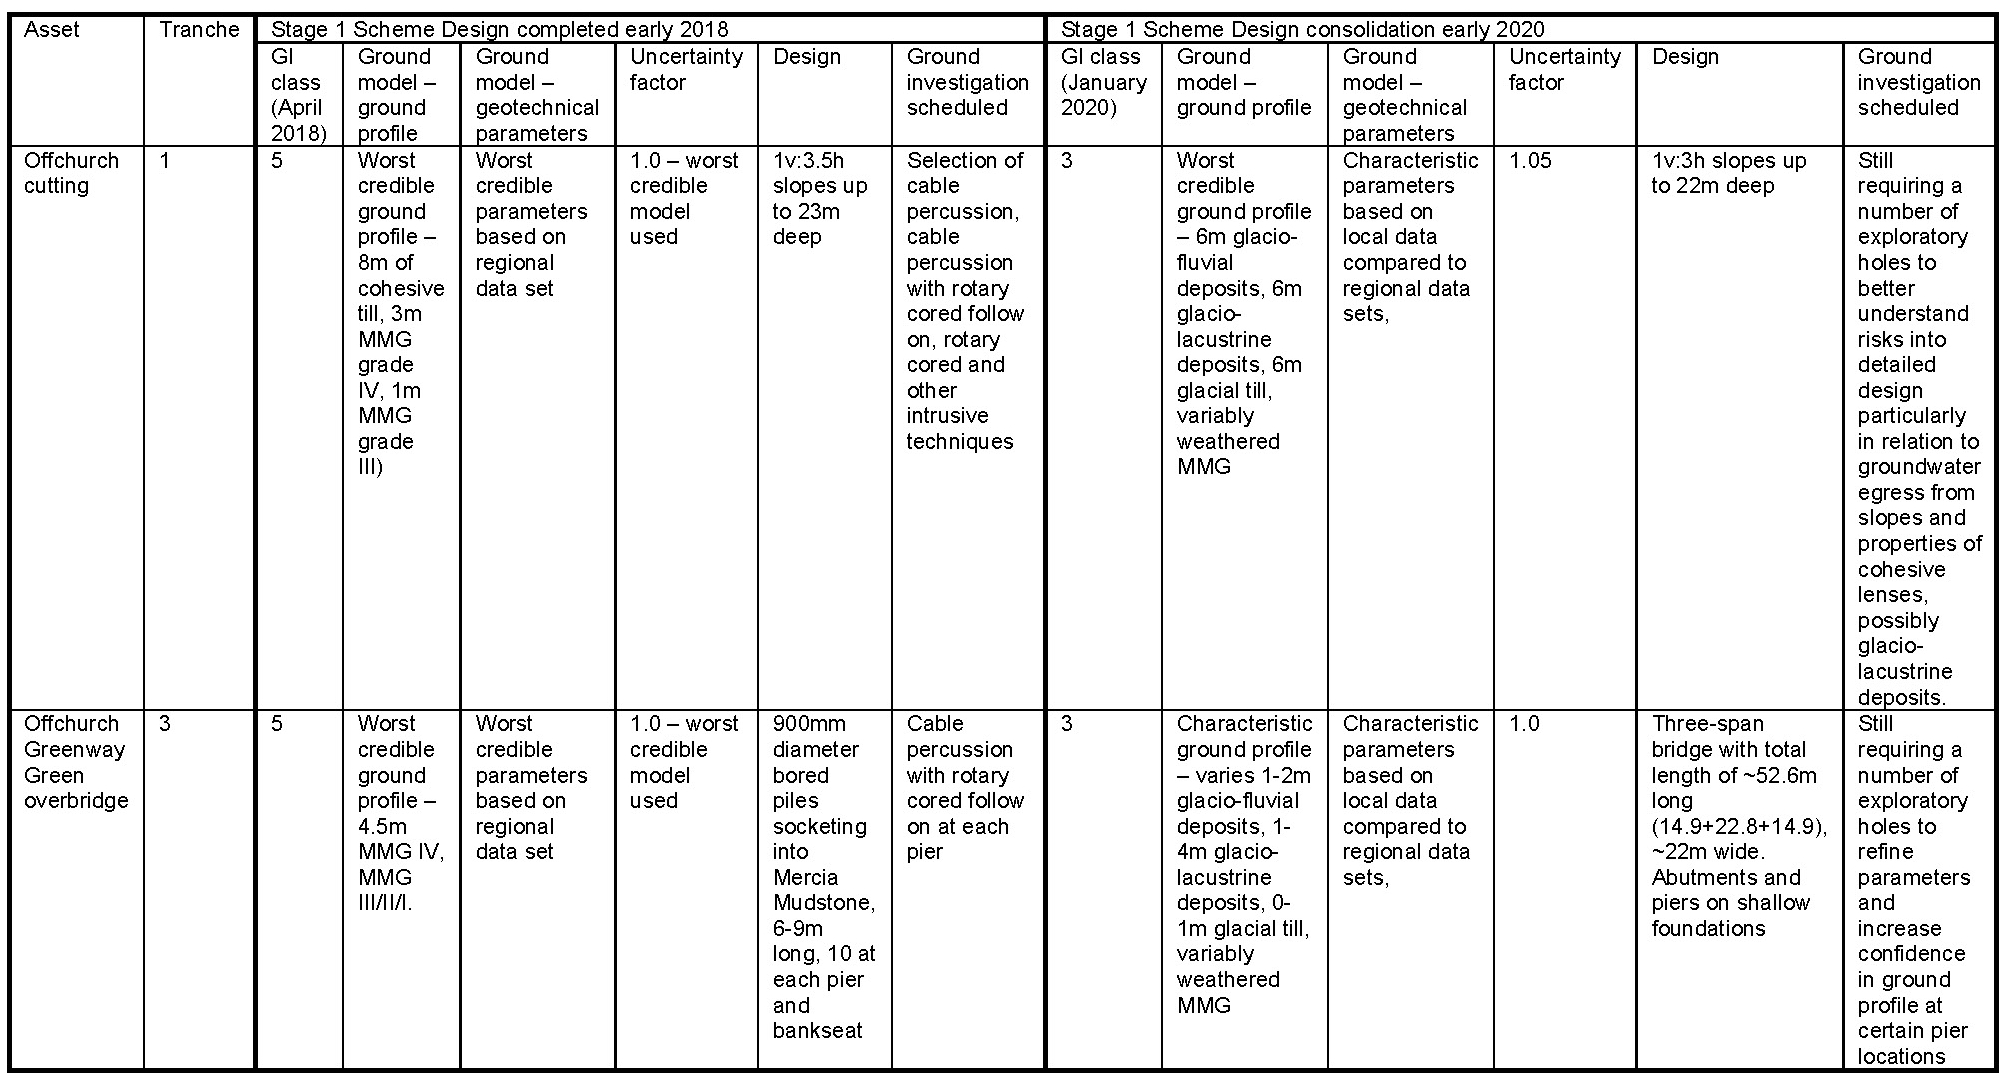 Table of the summary of GI class and associated design process 